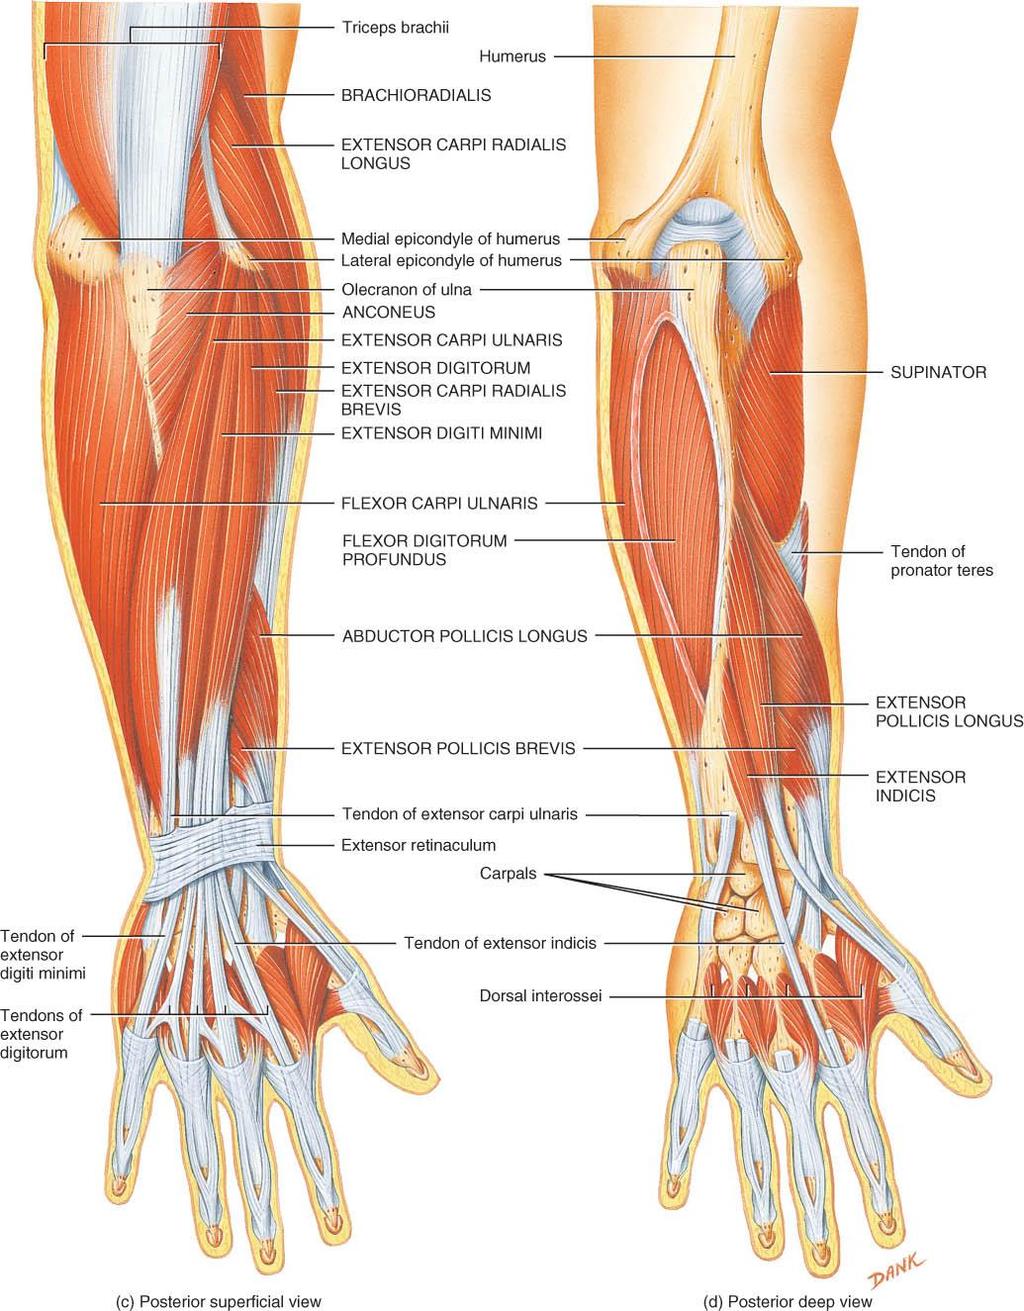 MUSCLES THAT SUPINATE & EXTEND o Supinator lateral epicondyle of humerus to radius supinates hand o